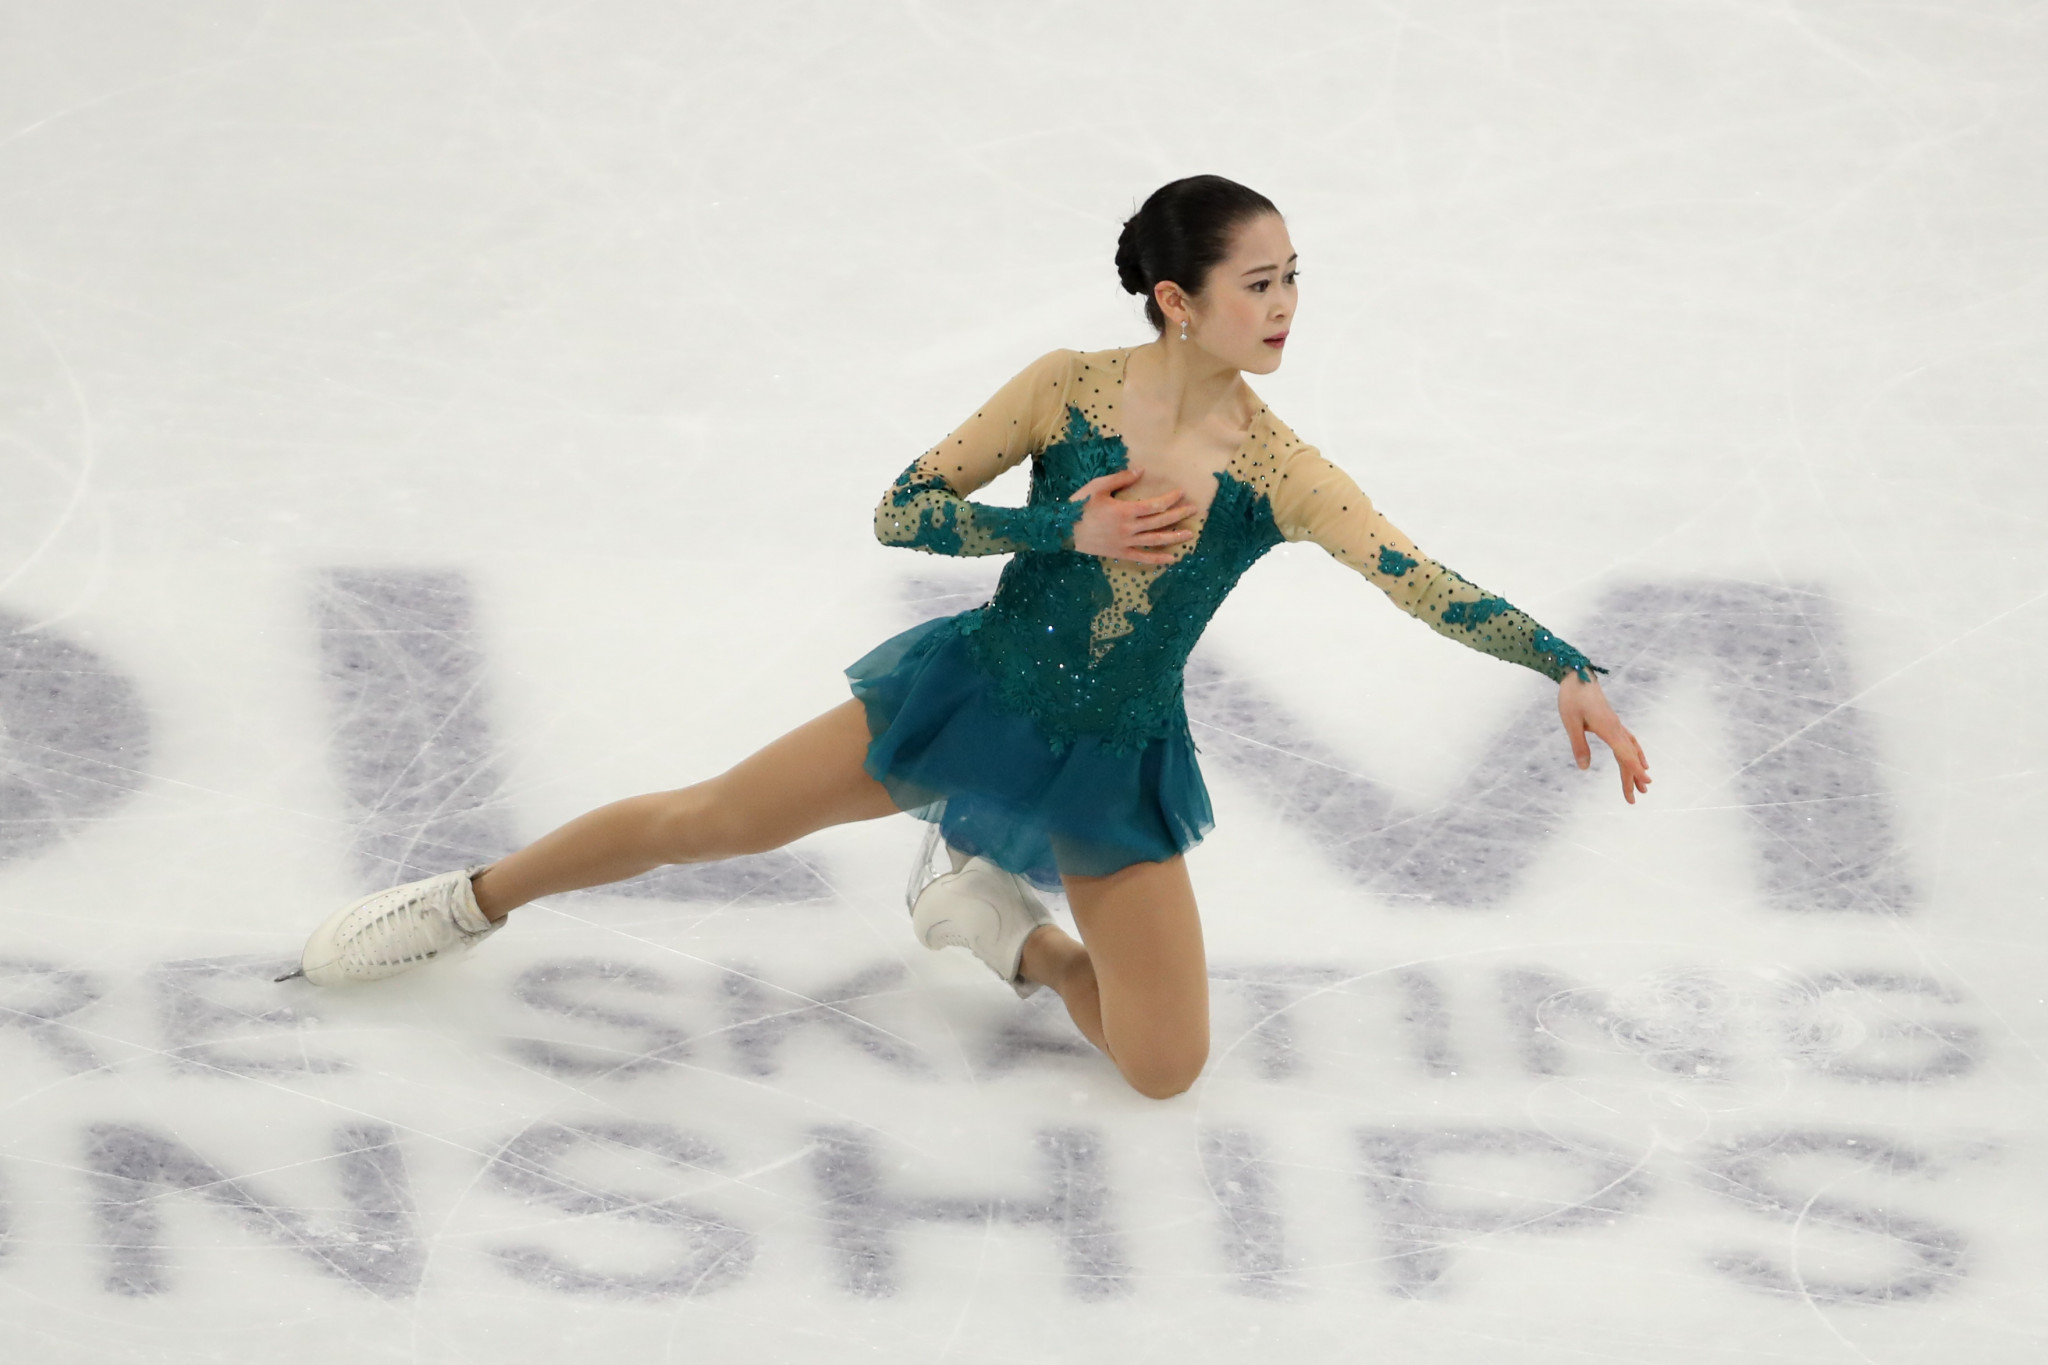 Two-time world figure skating medallist Miyahara finishes career aged 24